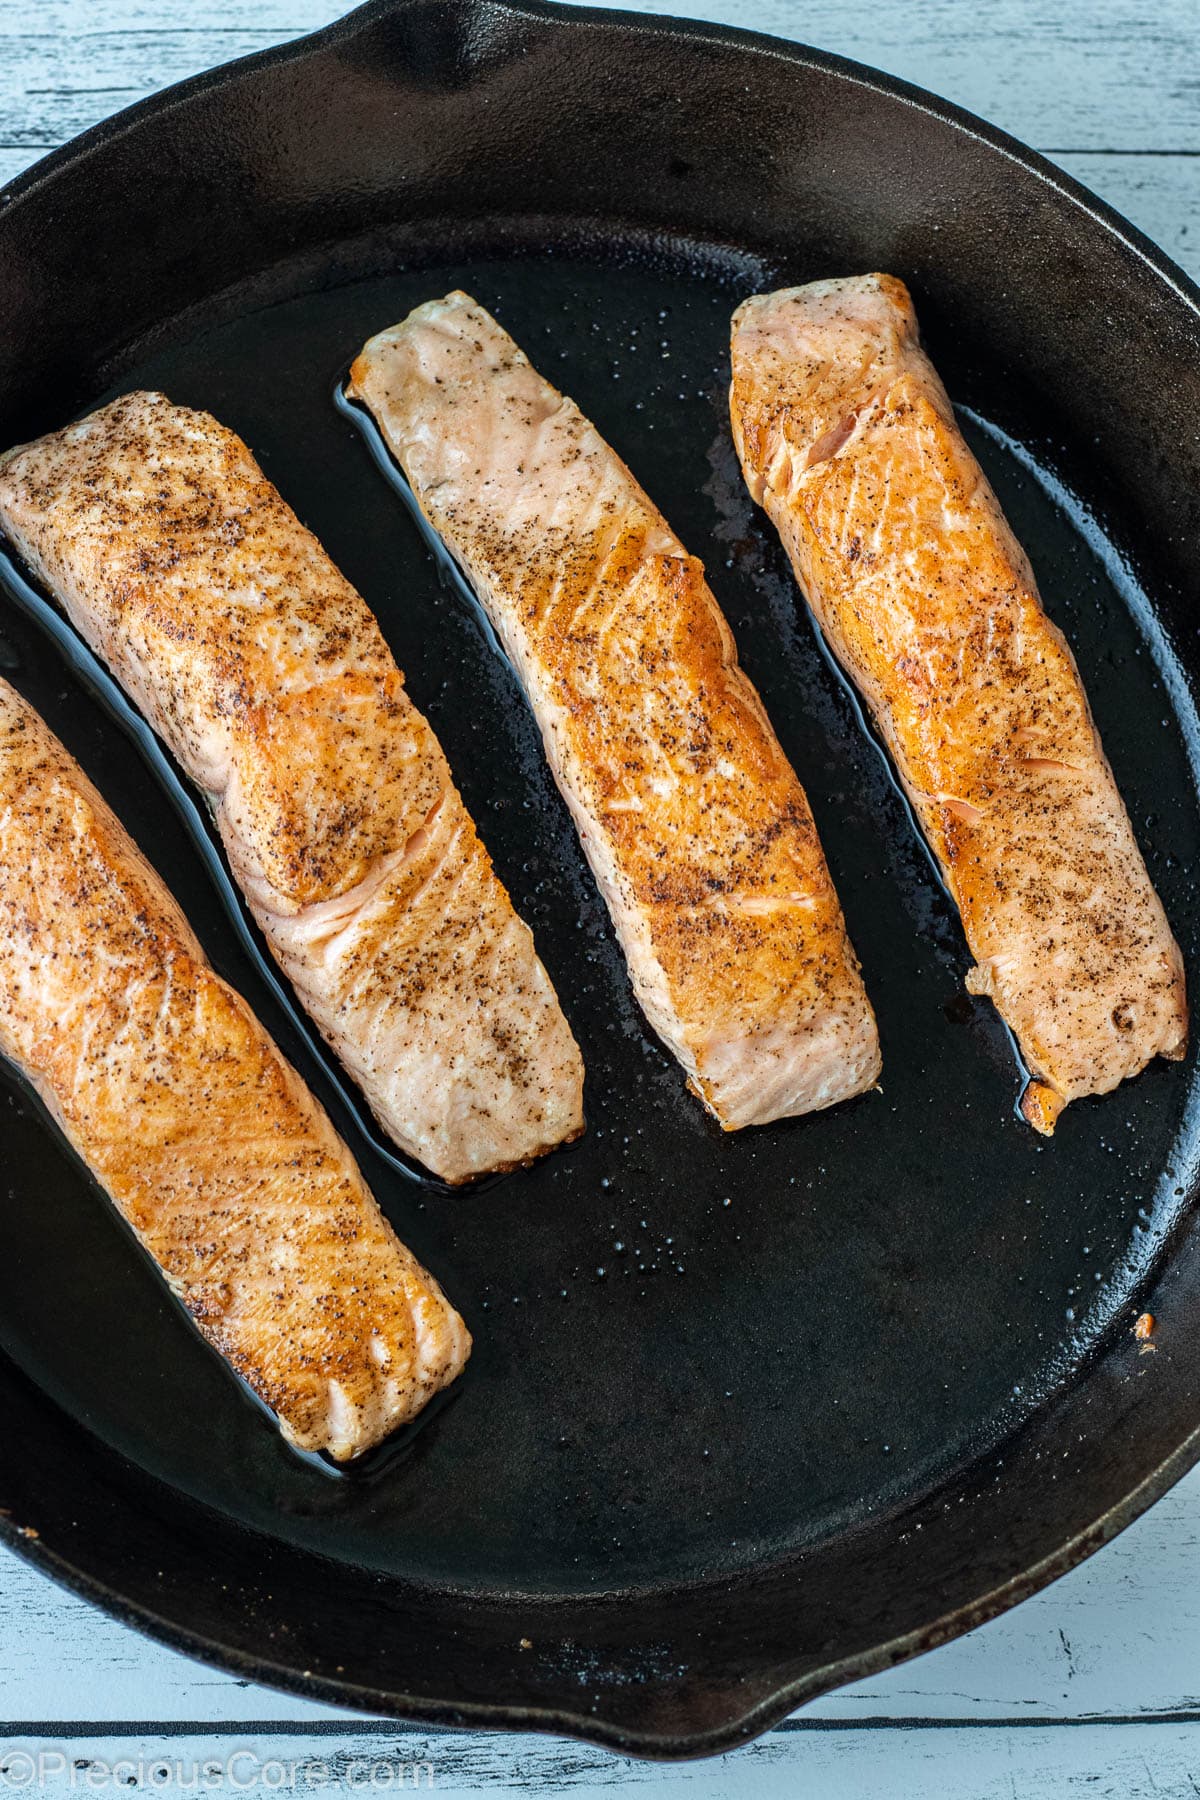 Seared salmon fillets in a cast iron skillet.